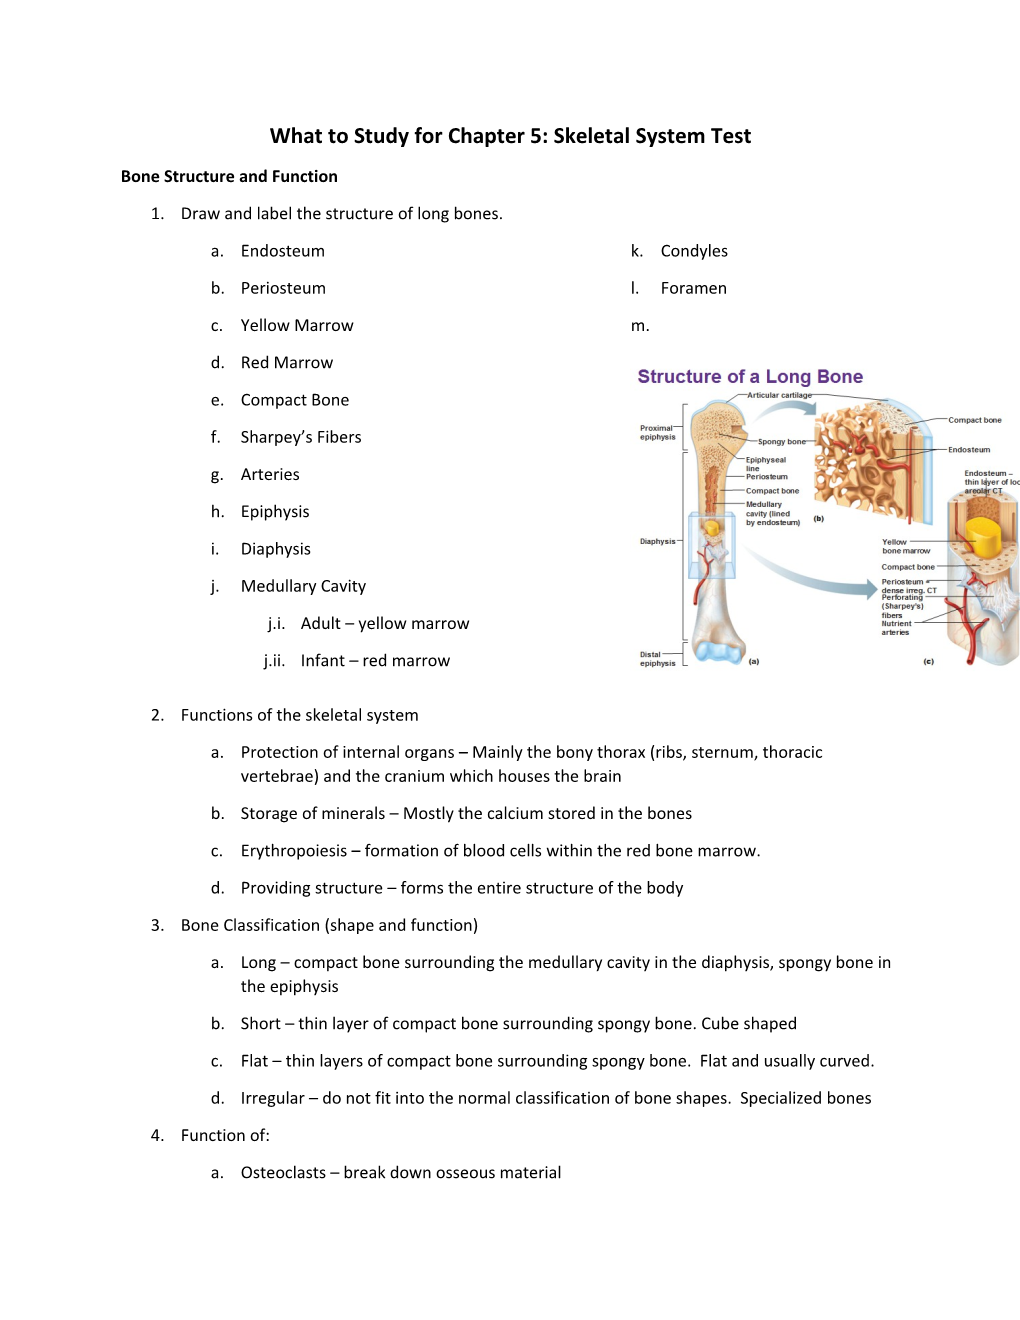 What to Study for Chapter 5: Skeletal System Test